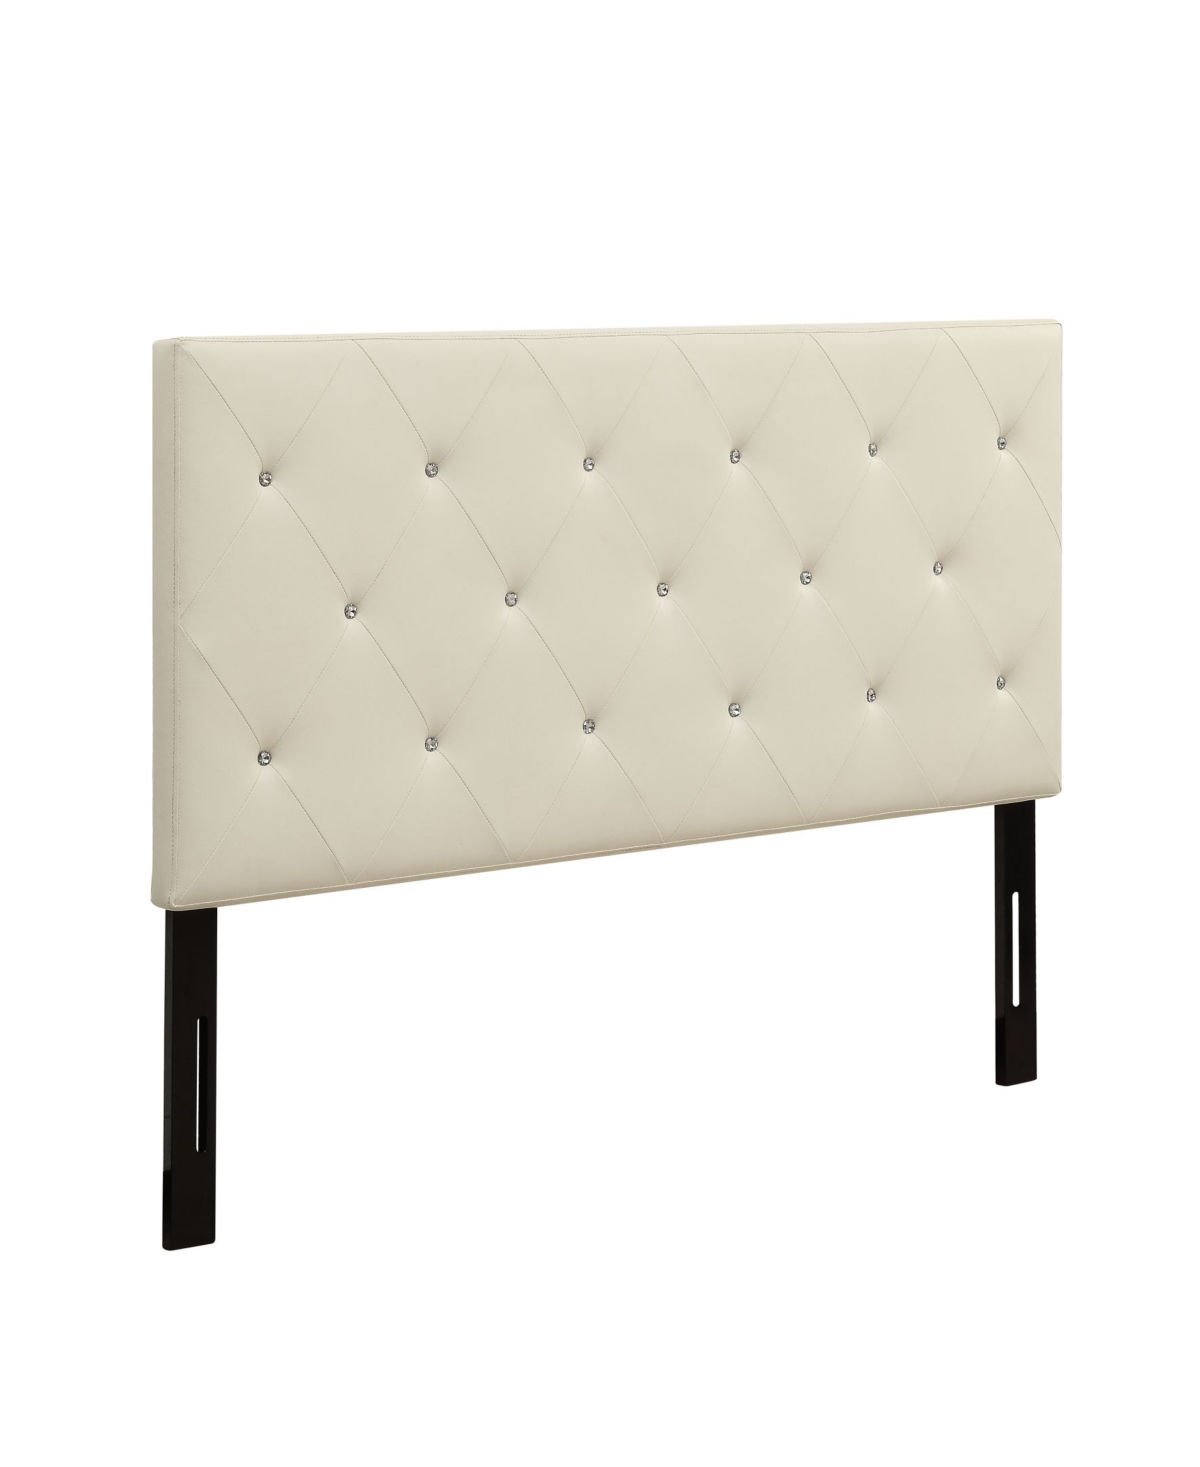 Ac Pacific Contemporary Crystal Diamond Tufted Queen Headboard In Open White